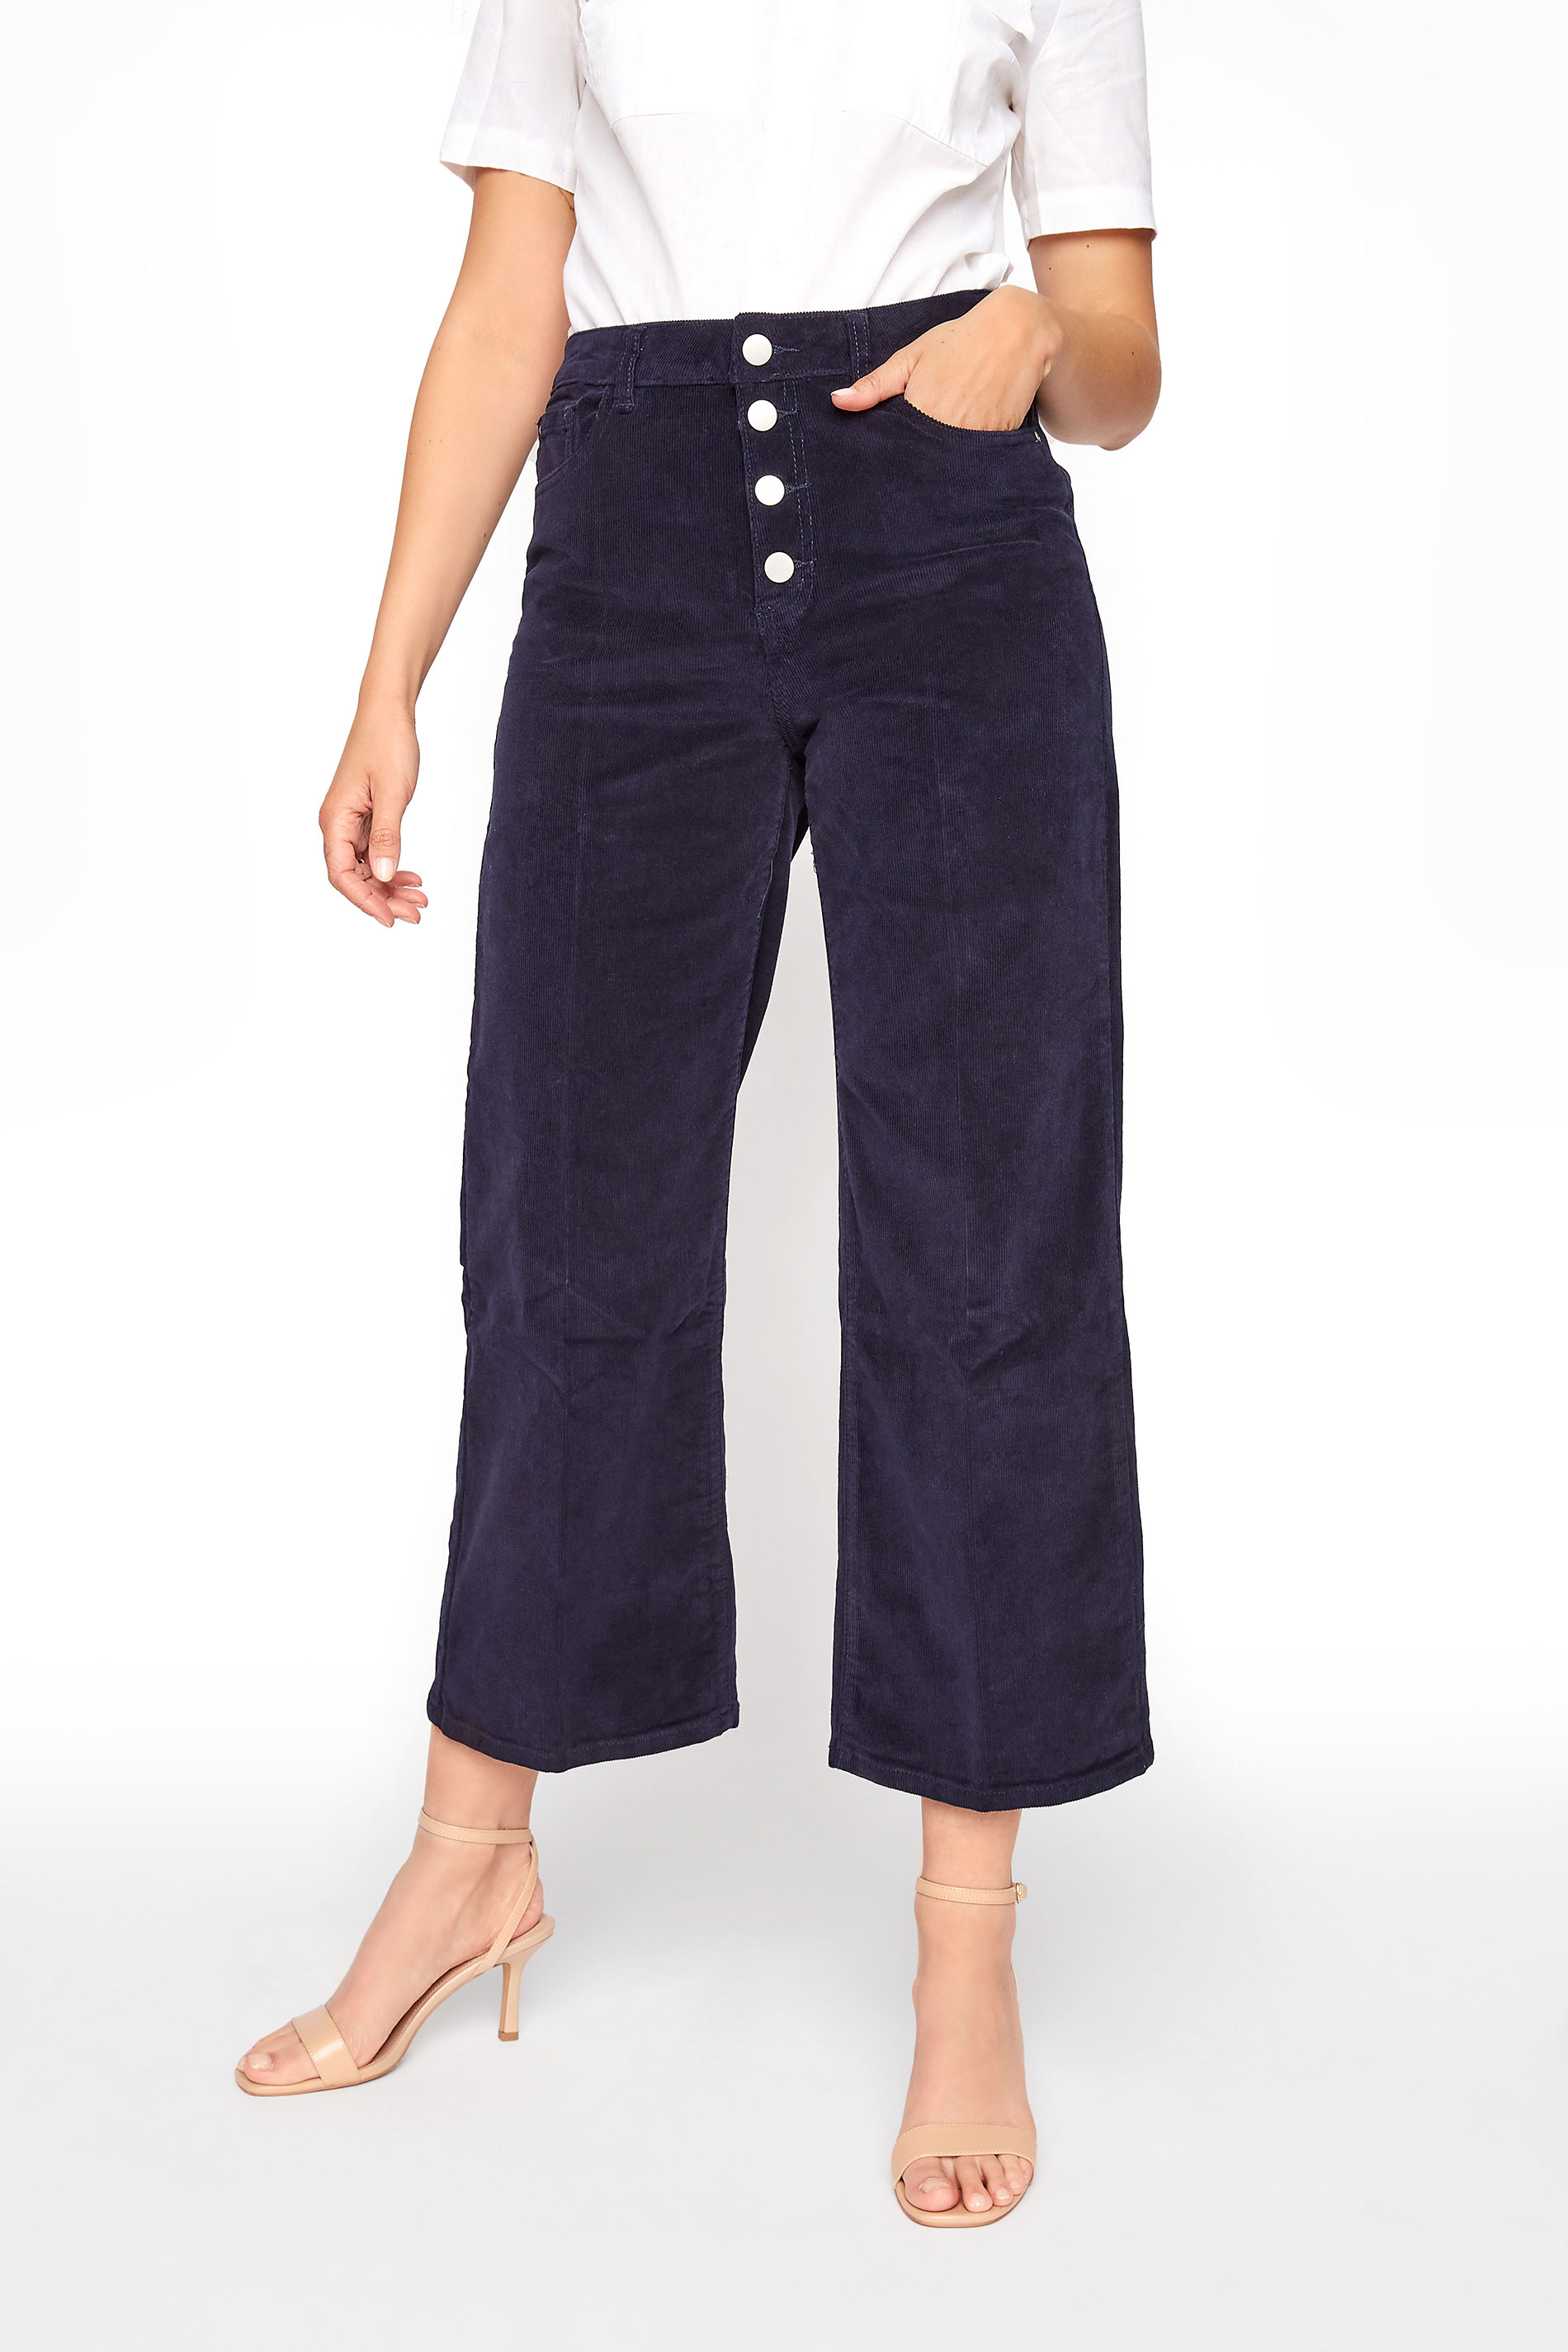 Navy Button Fly Cord Culotte | Long Tall Sally